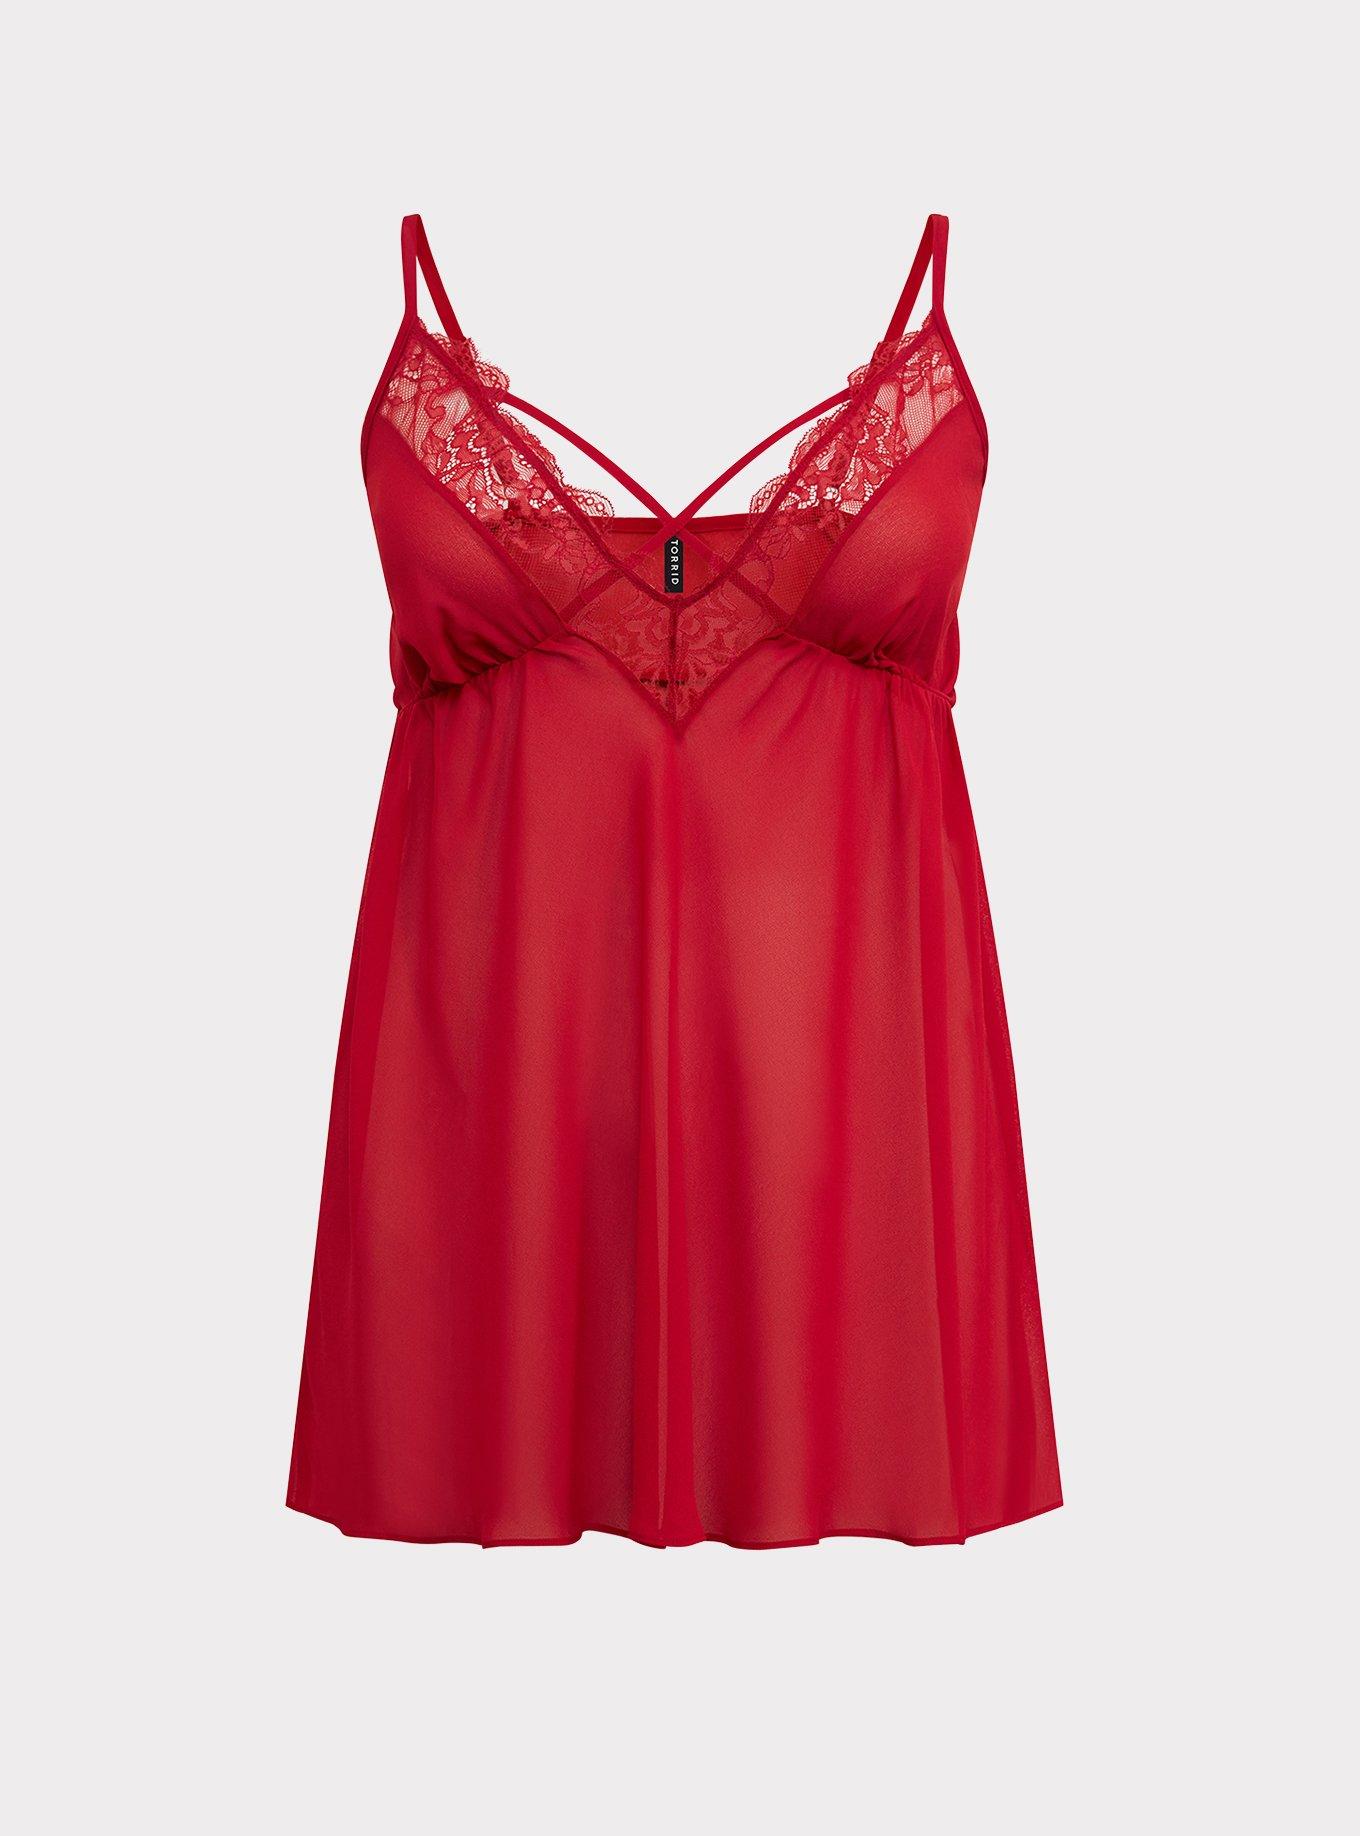 Plus Size - Outlander Red Chiffon & Lace Strappy Babydoll - Torrid